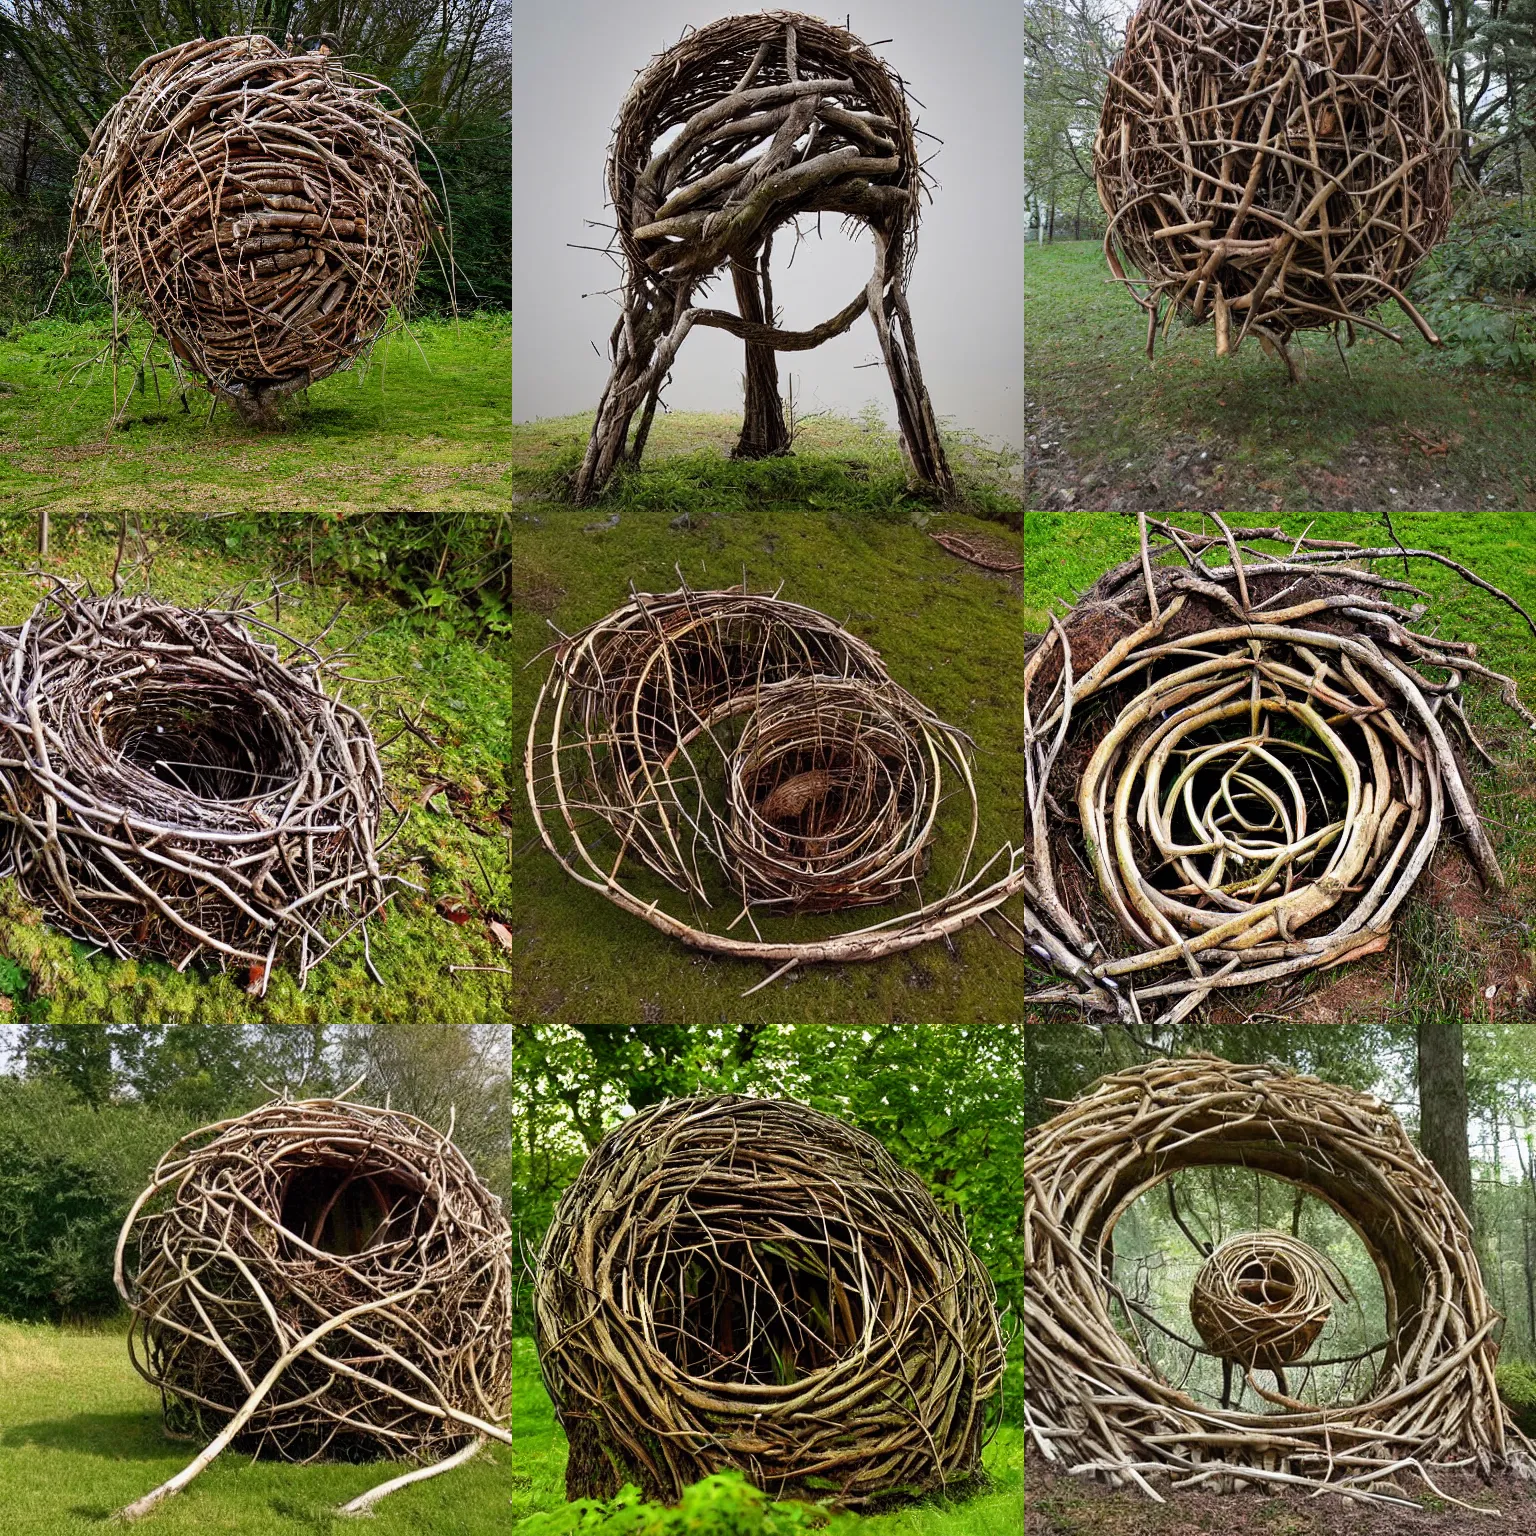 Prompt: an environment art sculpture by Nils-Udo, leaves twigs wood, nature, natural, round form, Bird nesting inside structure, leaf spiral pattern around outside of structure